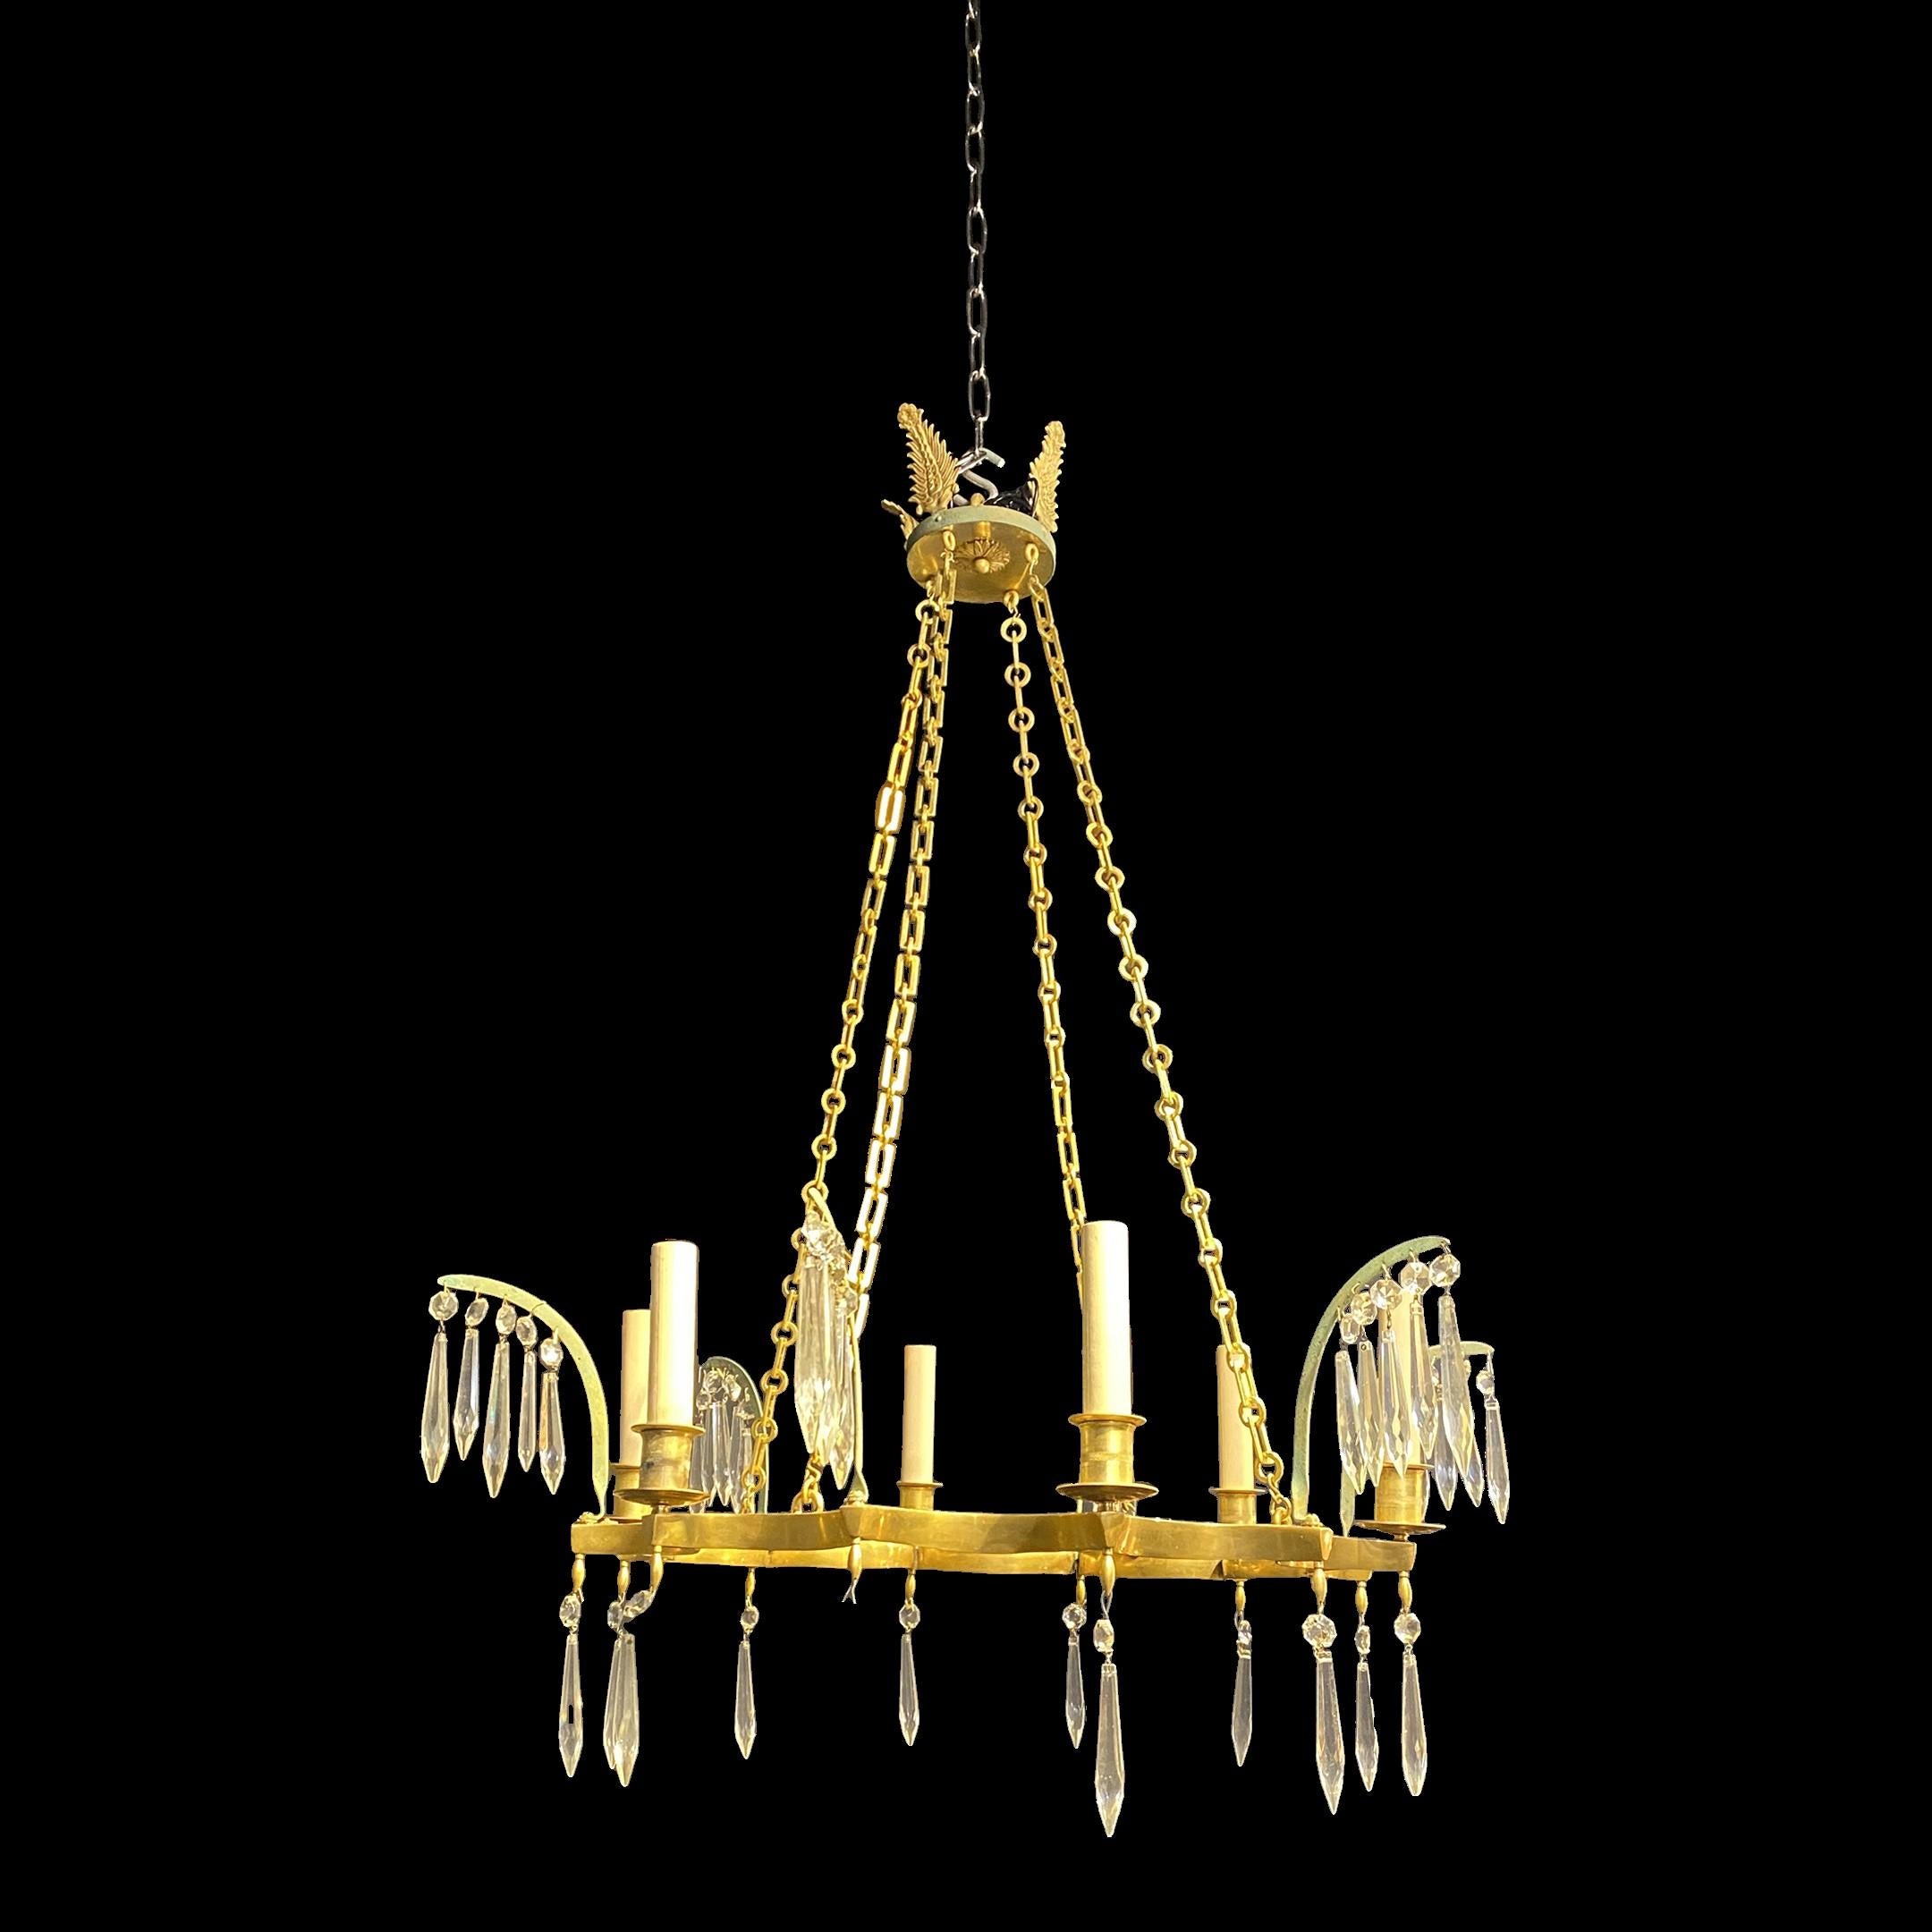 Bronze 1930's French Empire Style Scalloped Chandelier For Sale